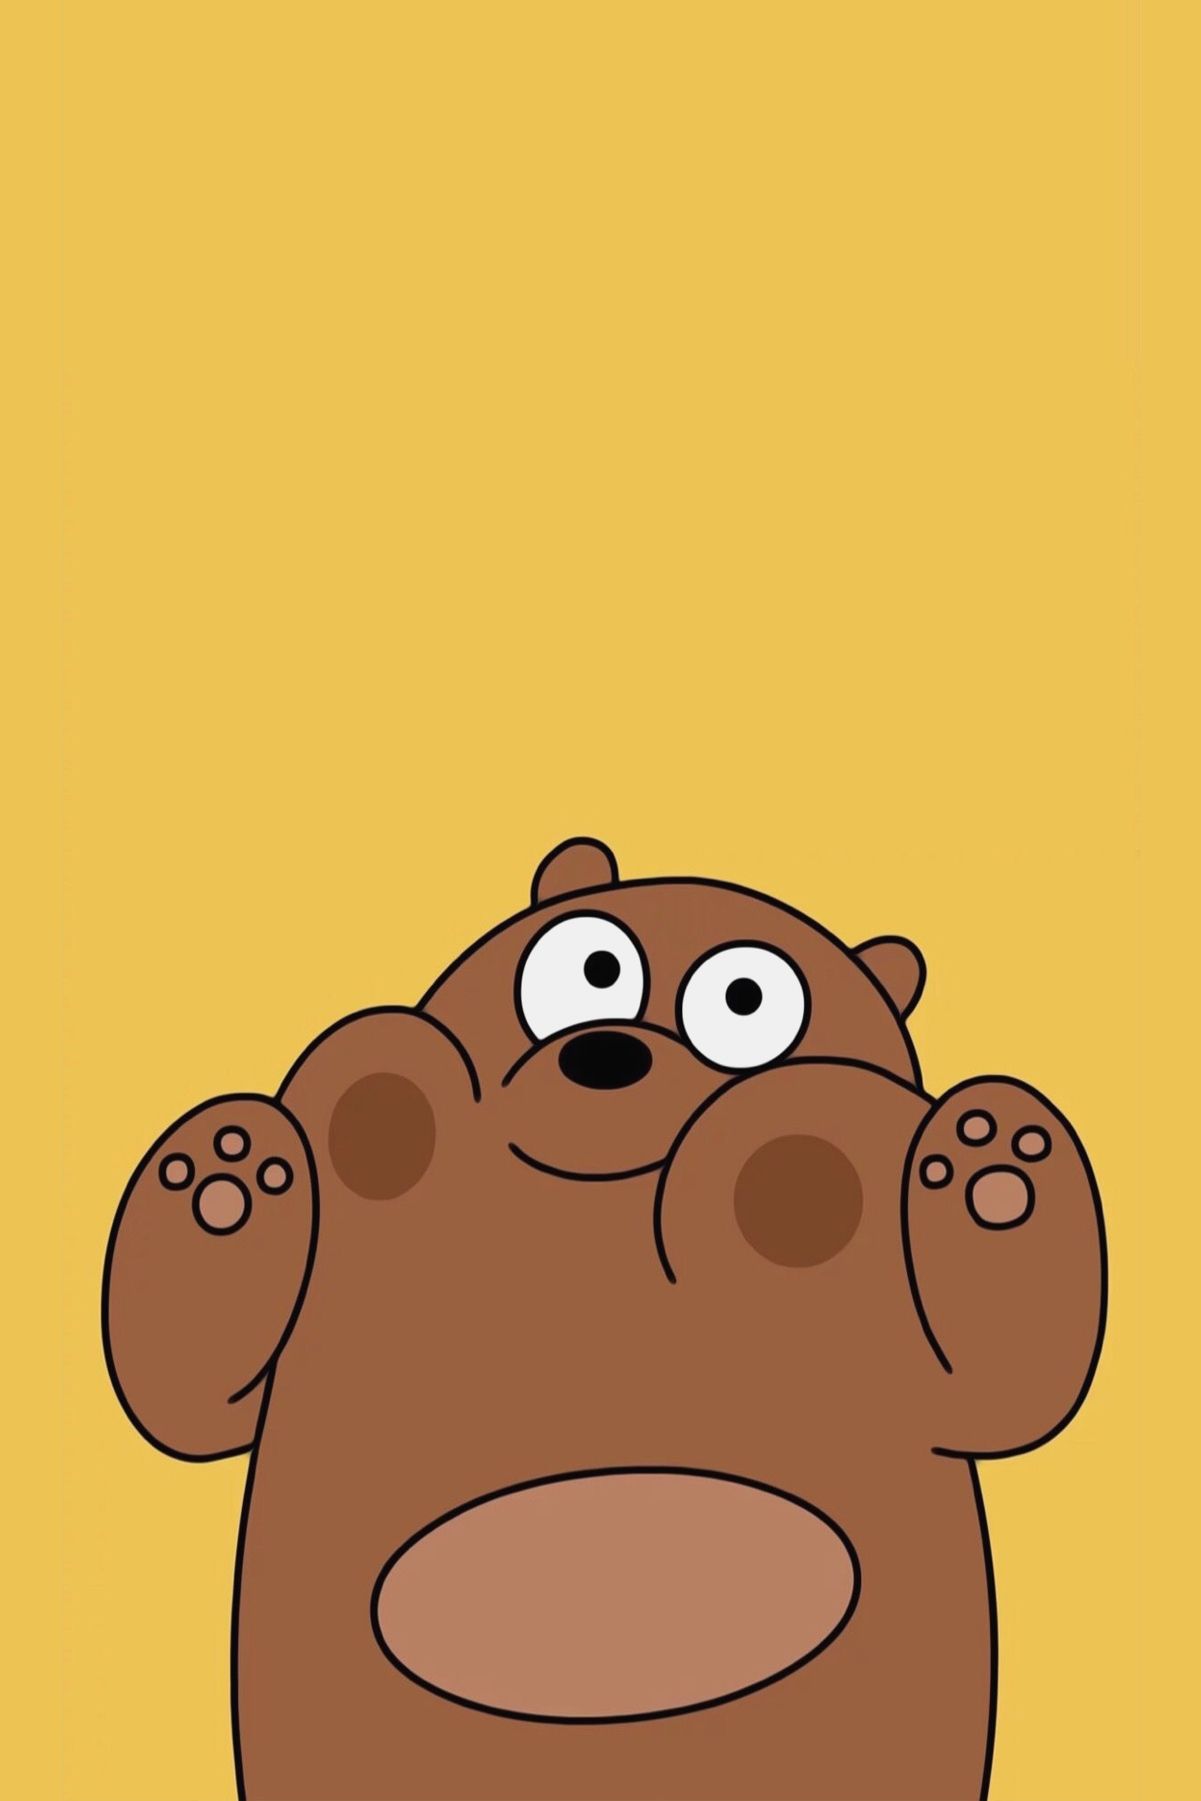 Top More Than 87 Cute Bear Wallpaper Iphone Latest - In.cdgdbentre